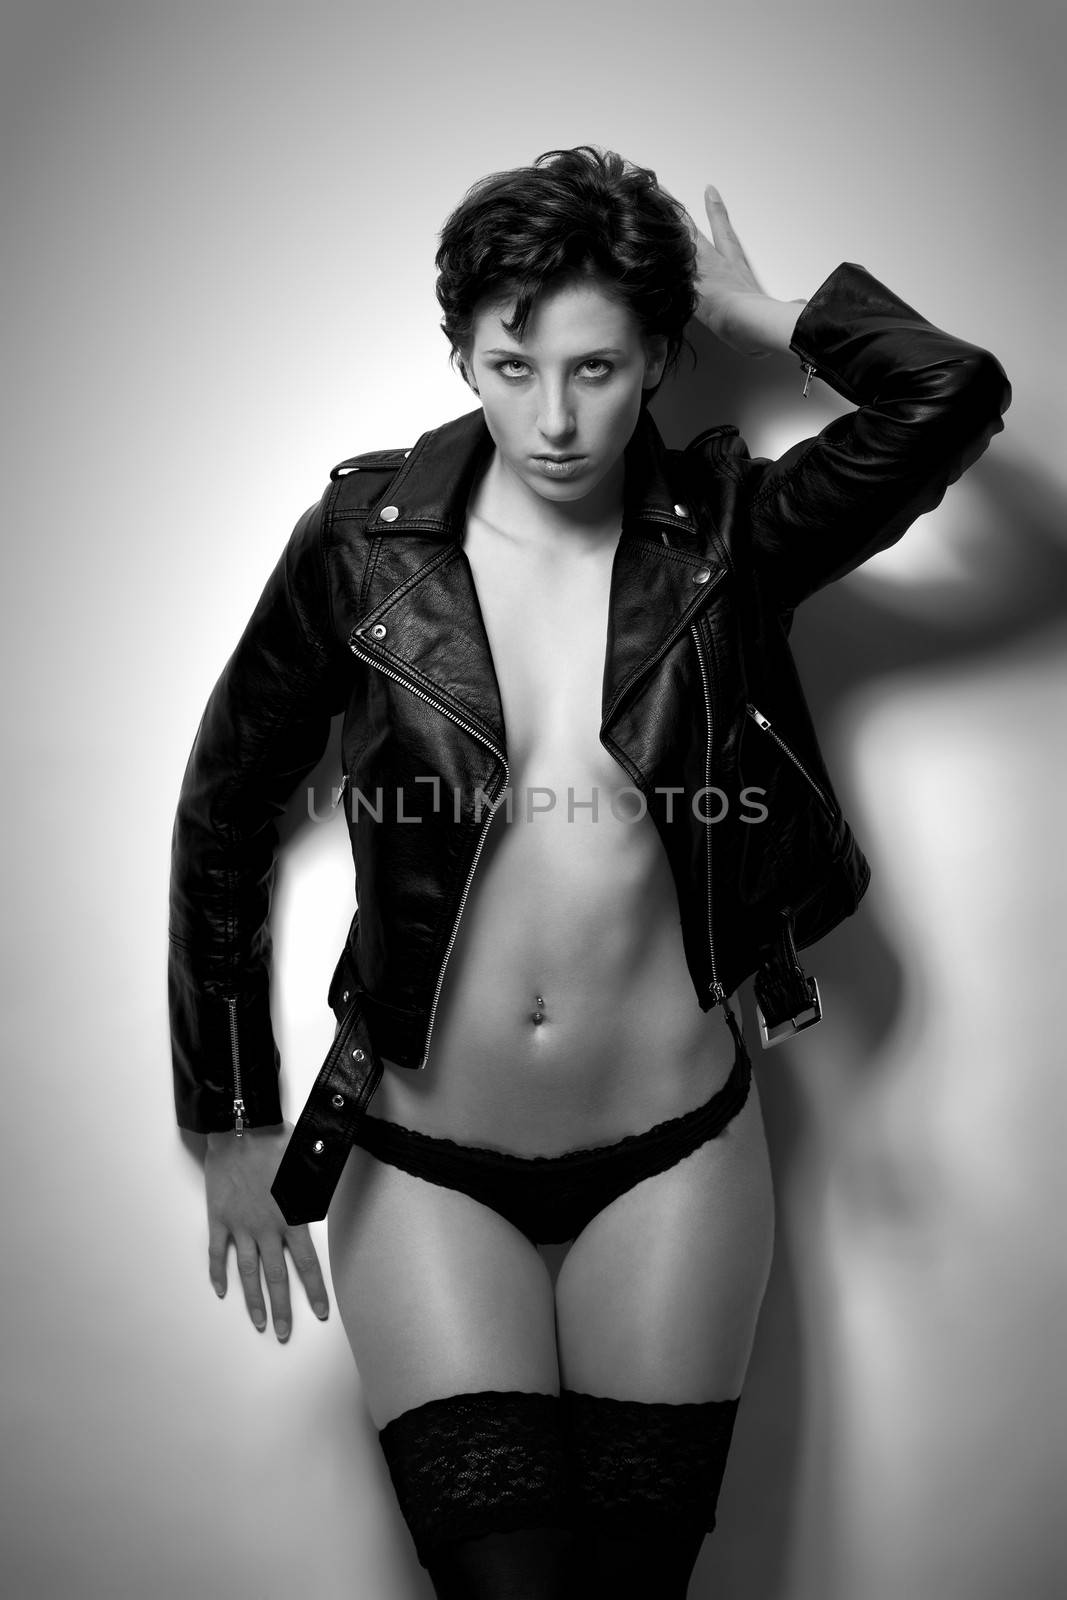 gorgeous woman in leather and lingerie by RobStark